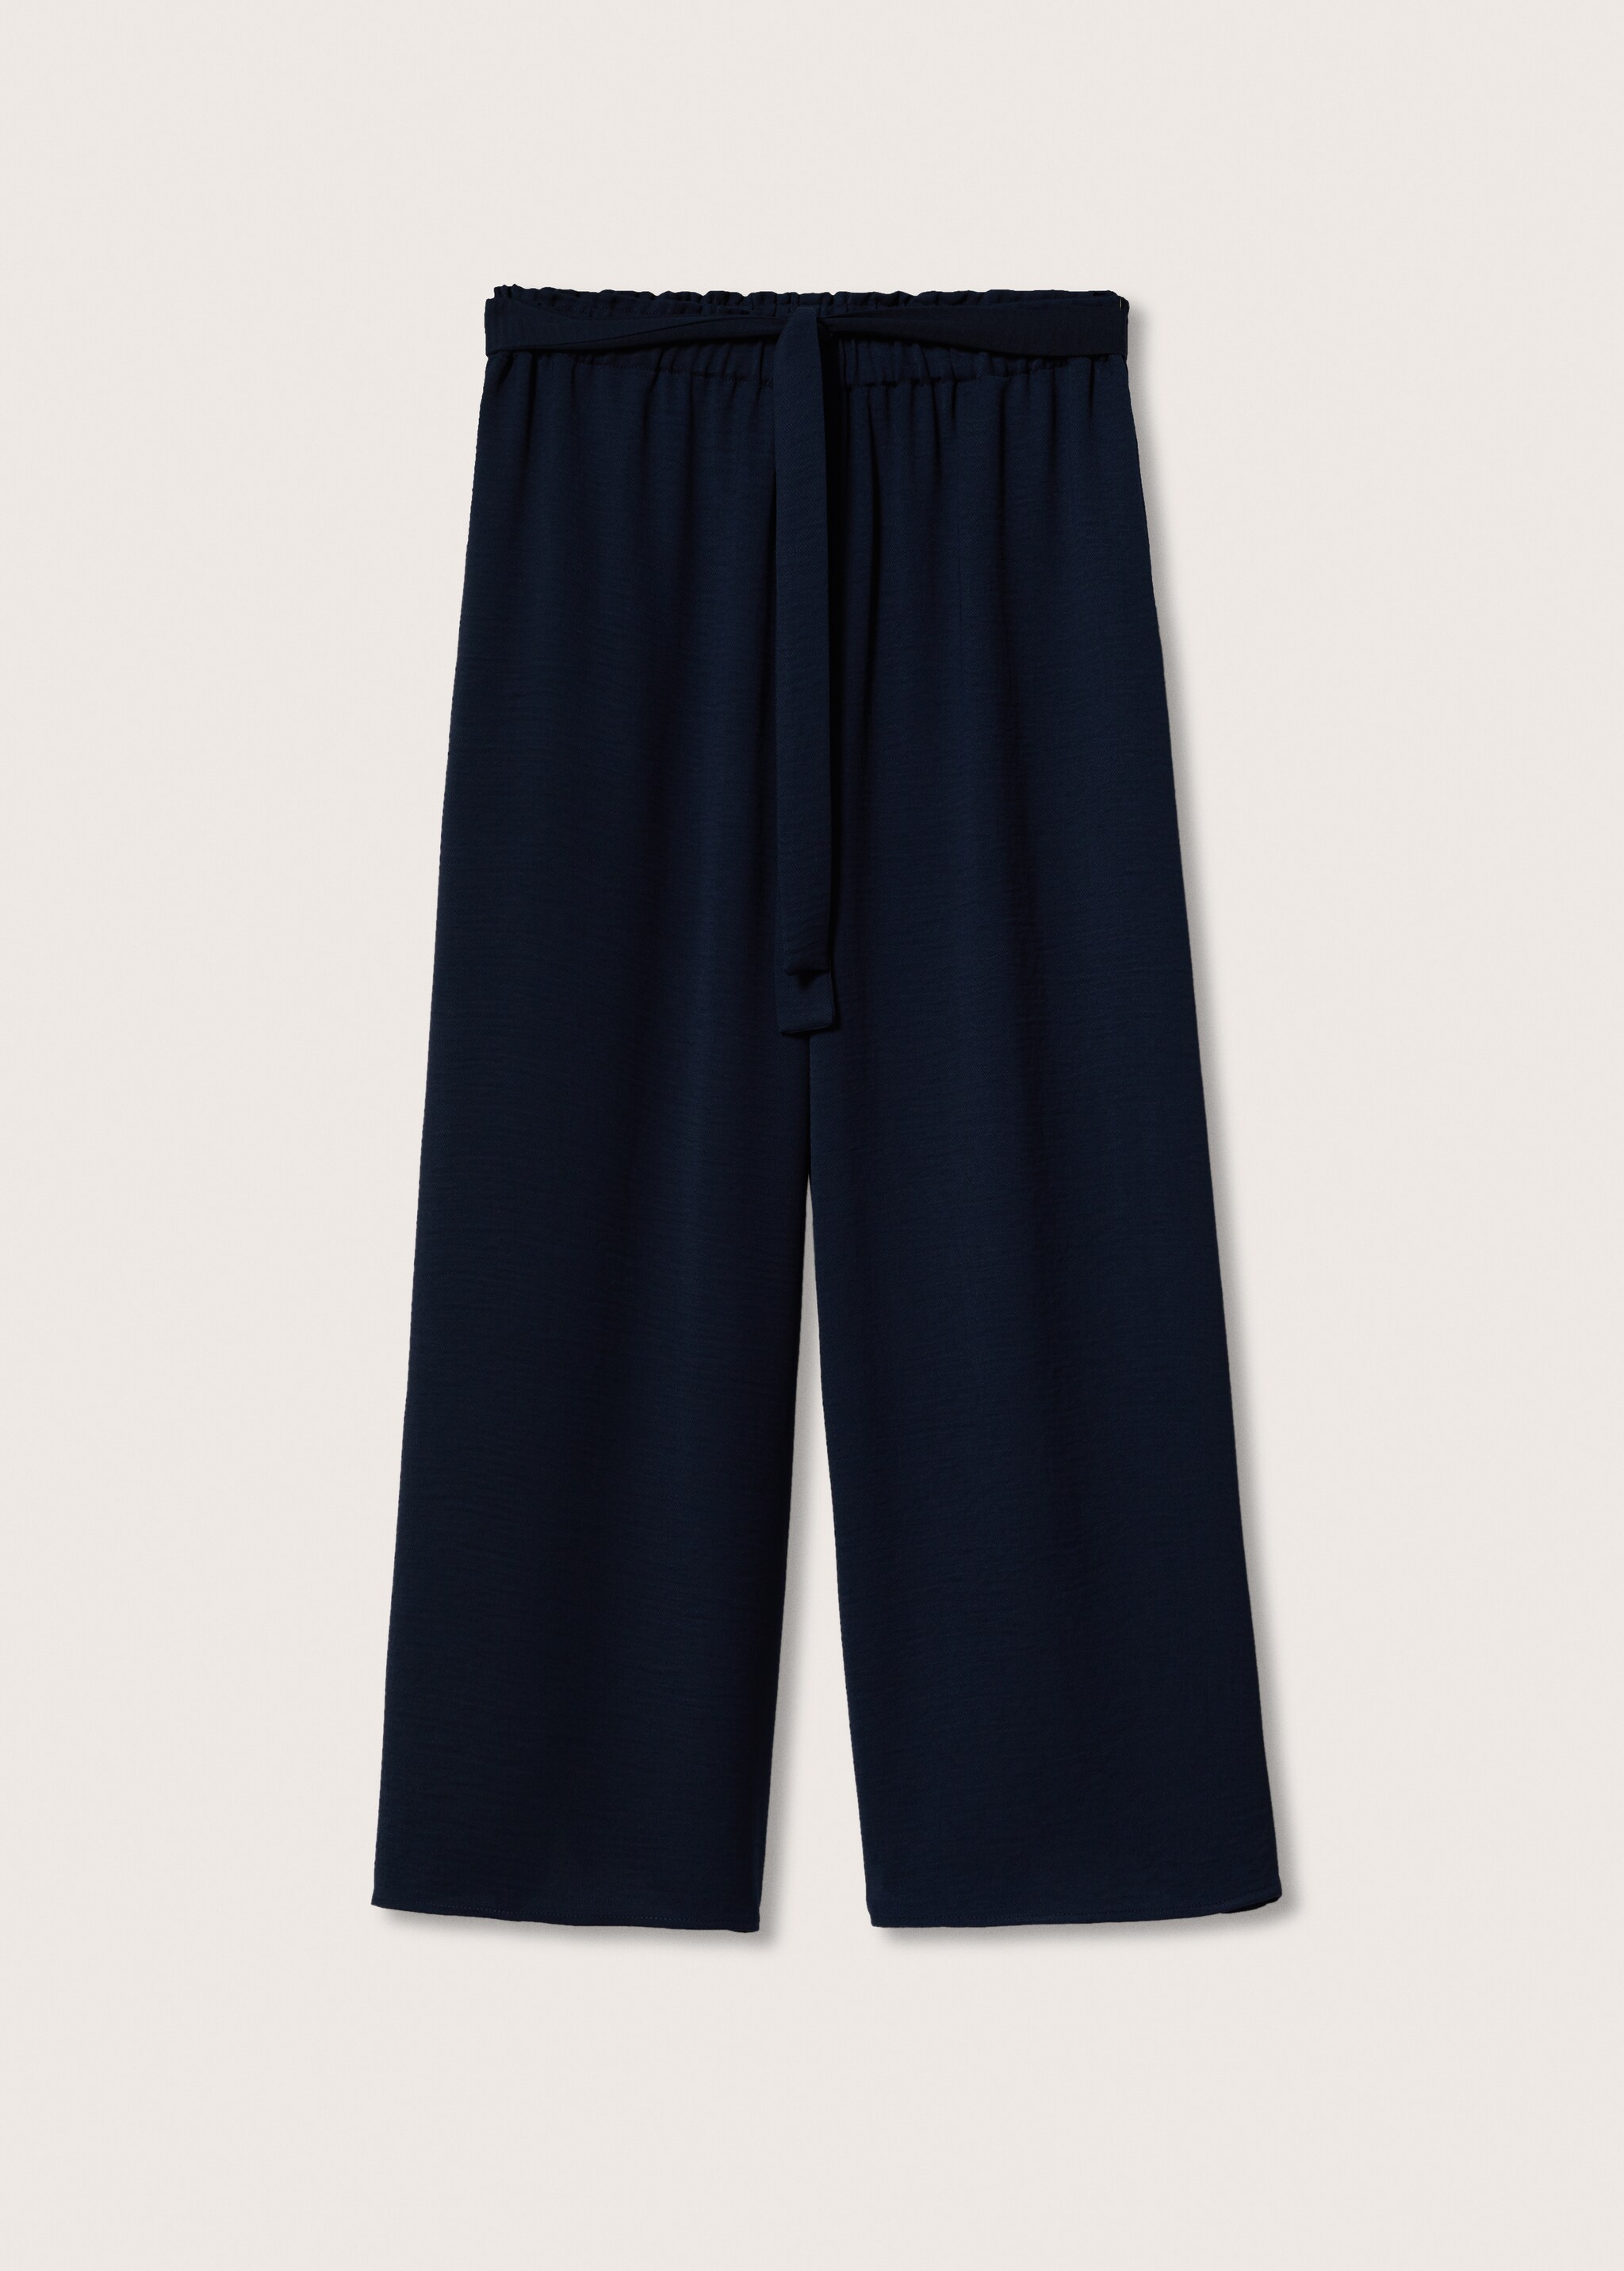 Belt culottes trousers - Article without model